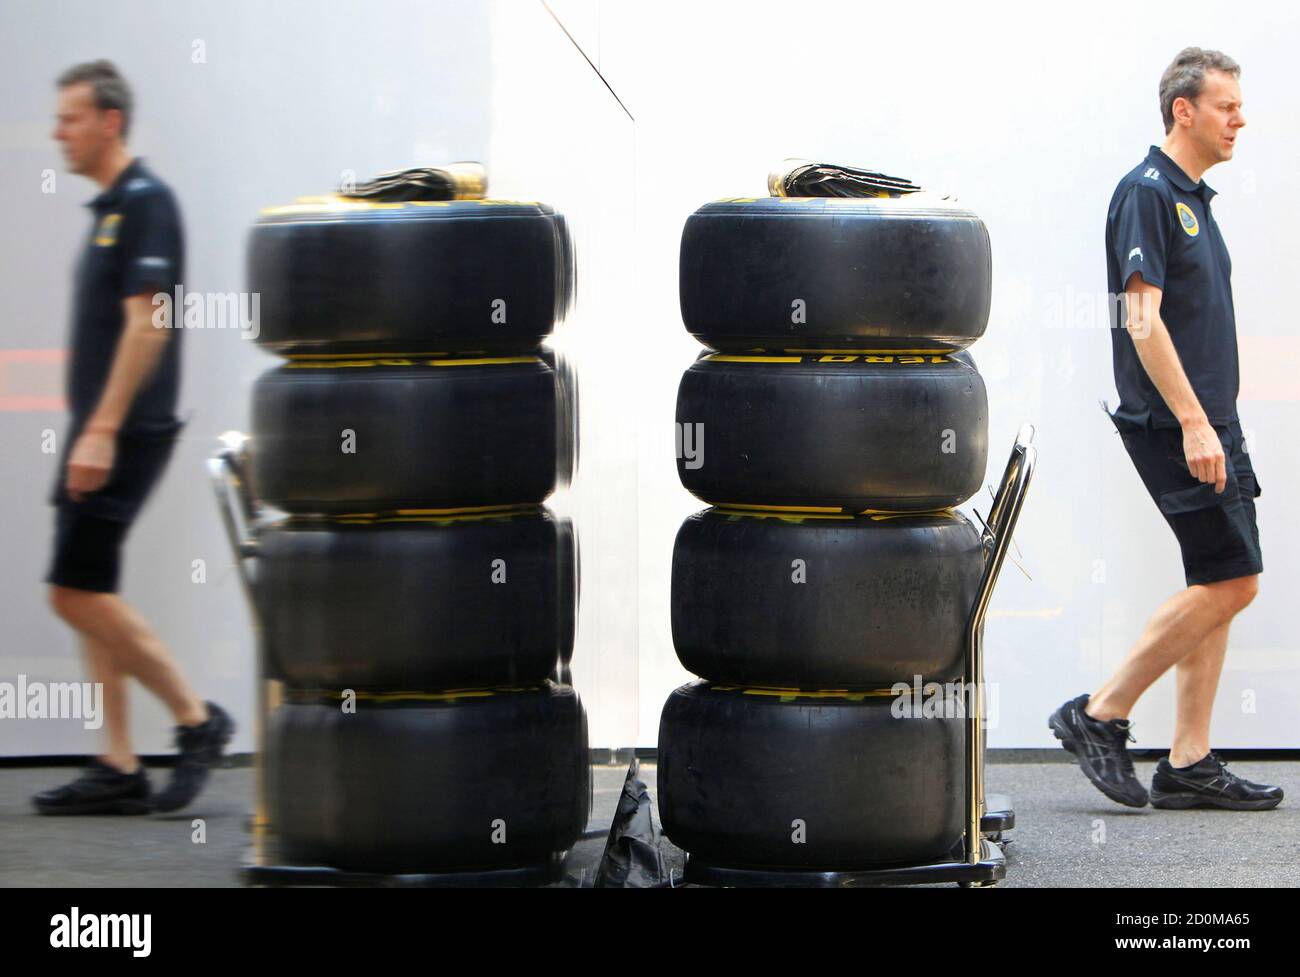 A technican walks past a pile of tyres at Lotus Formula One team's paddock after the first practice session of the Hungarian F1 Grand Prix at the Hungaroring circuit, near Budapest, Hungary July 24, 2015. Lotus team blamed a banking technicality for a delay in Pirelli releasing tyres to them ahead of first Hungarian Grand Prix practice on Friday. The team received their tyres less than an hour before cars went out on track at the Hungaroring. REUTERS/Bernadett Szabo Stock Photo